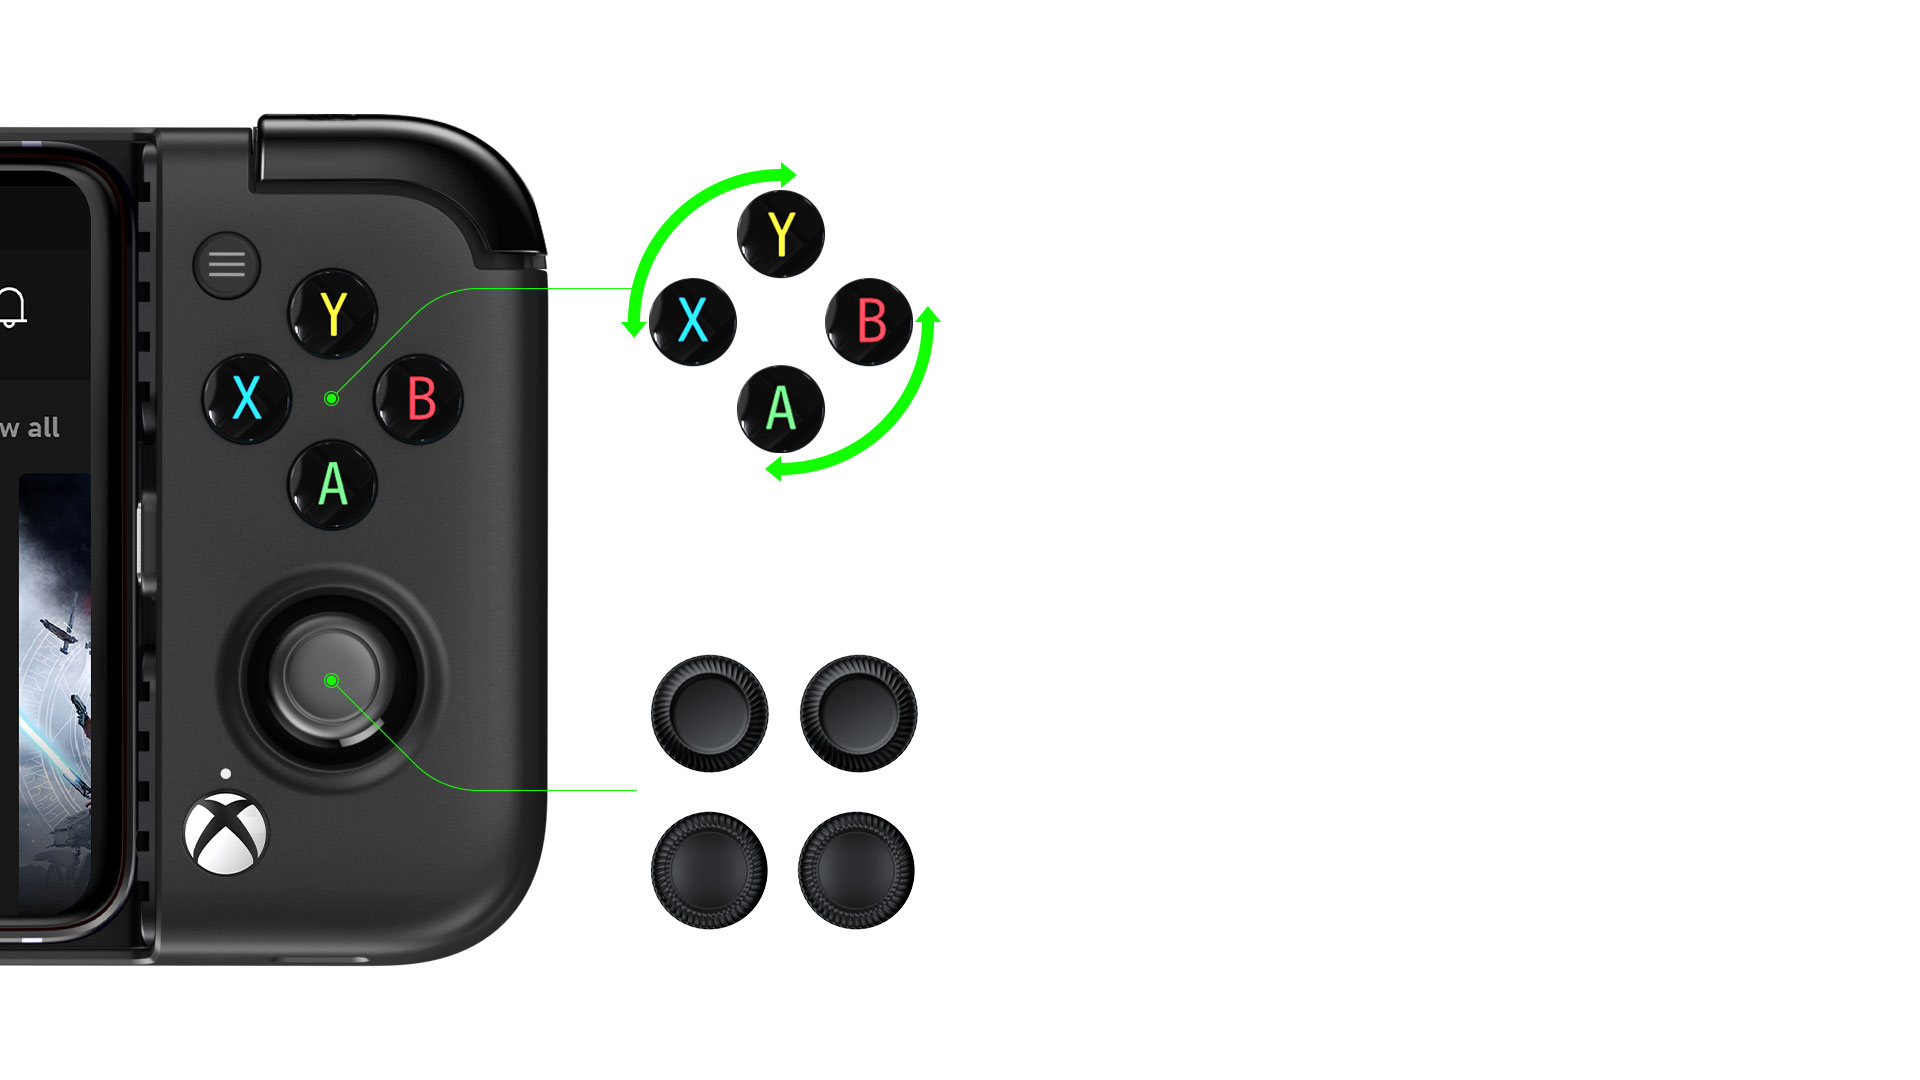 Right side view showing the different button and stick options